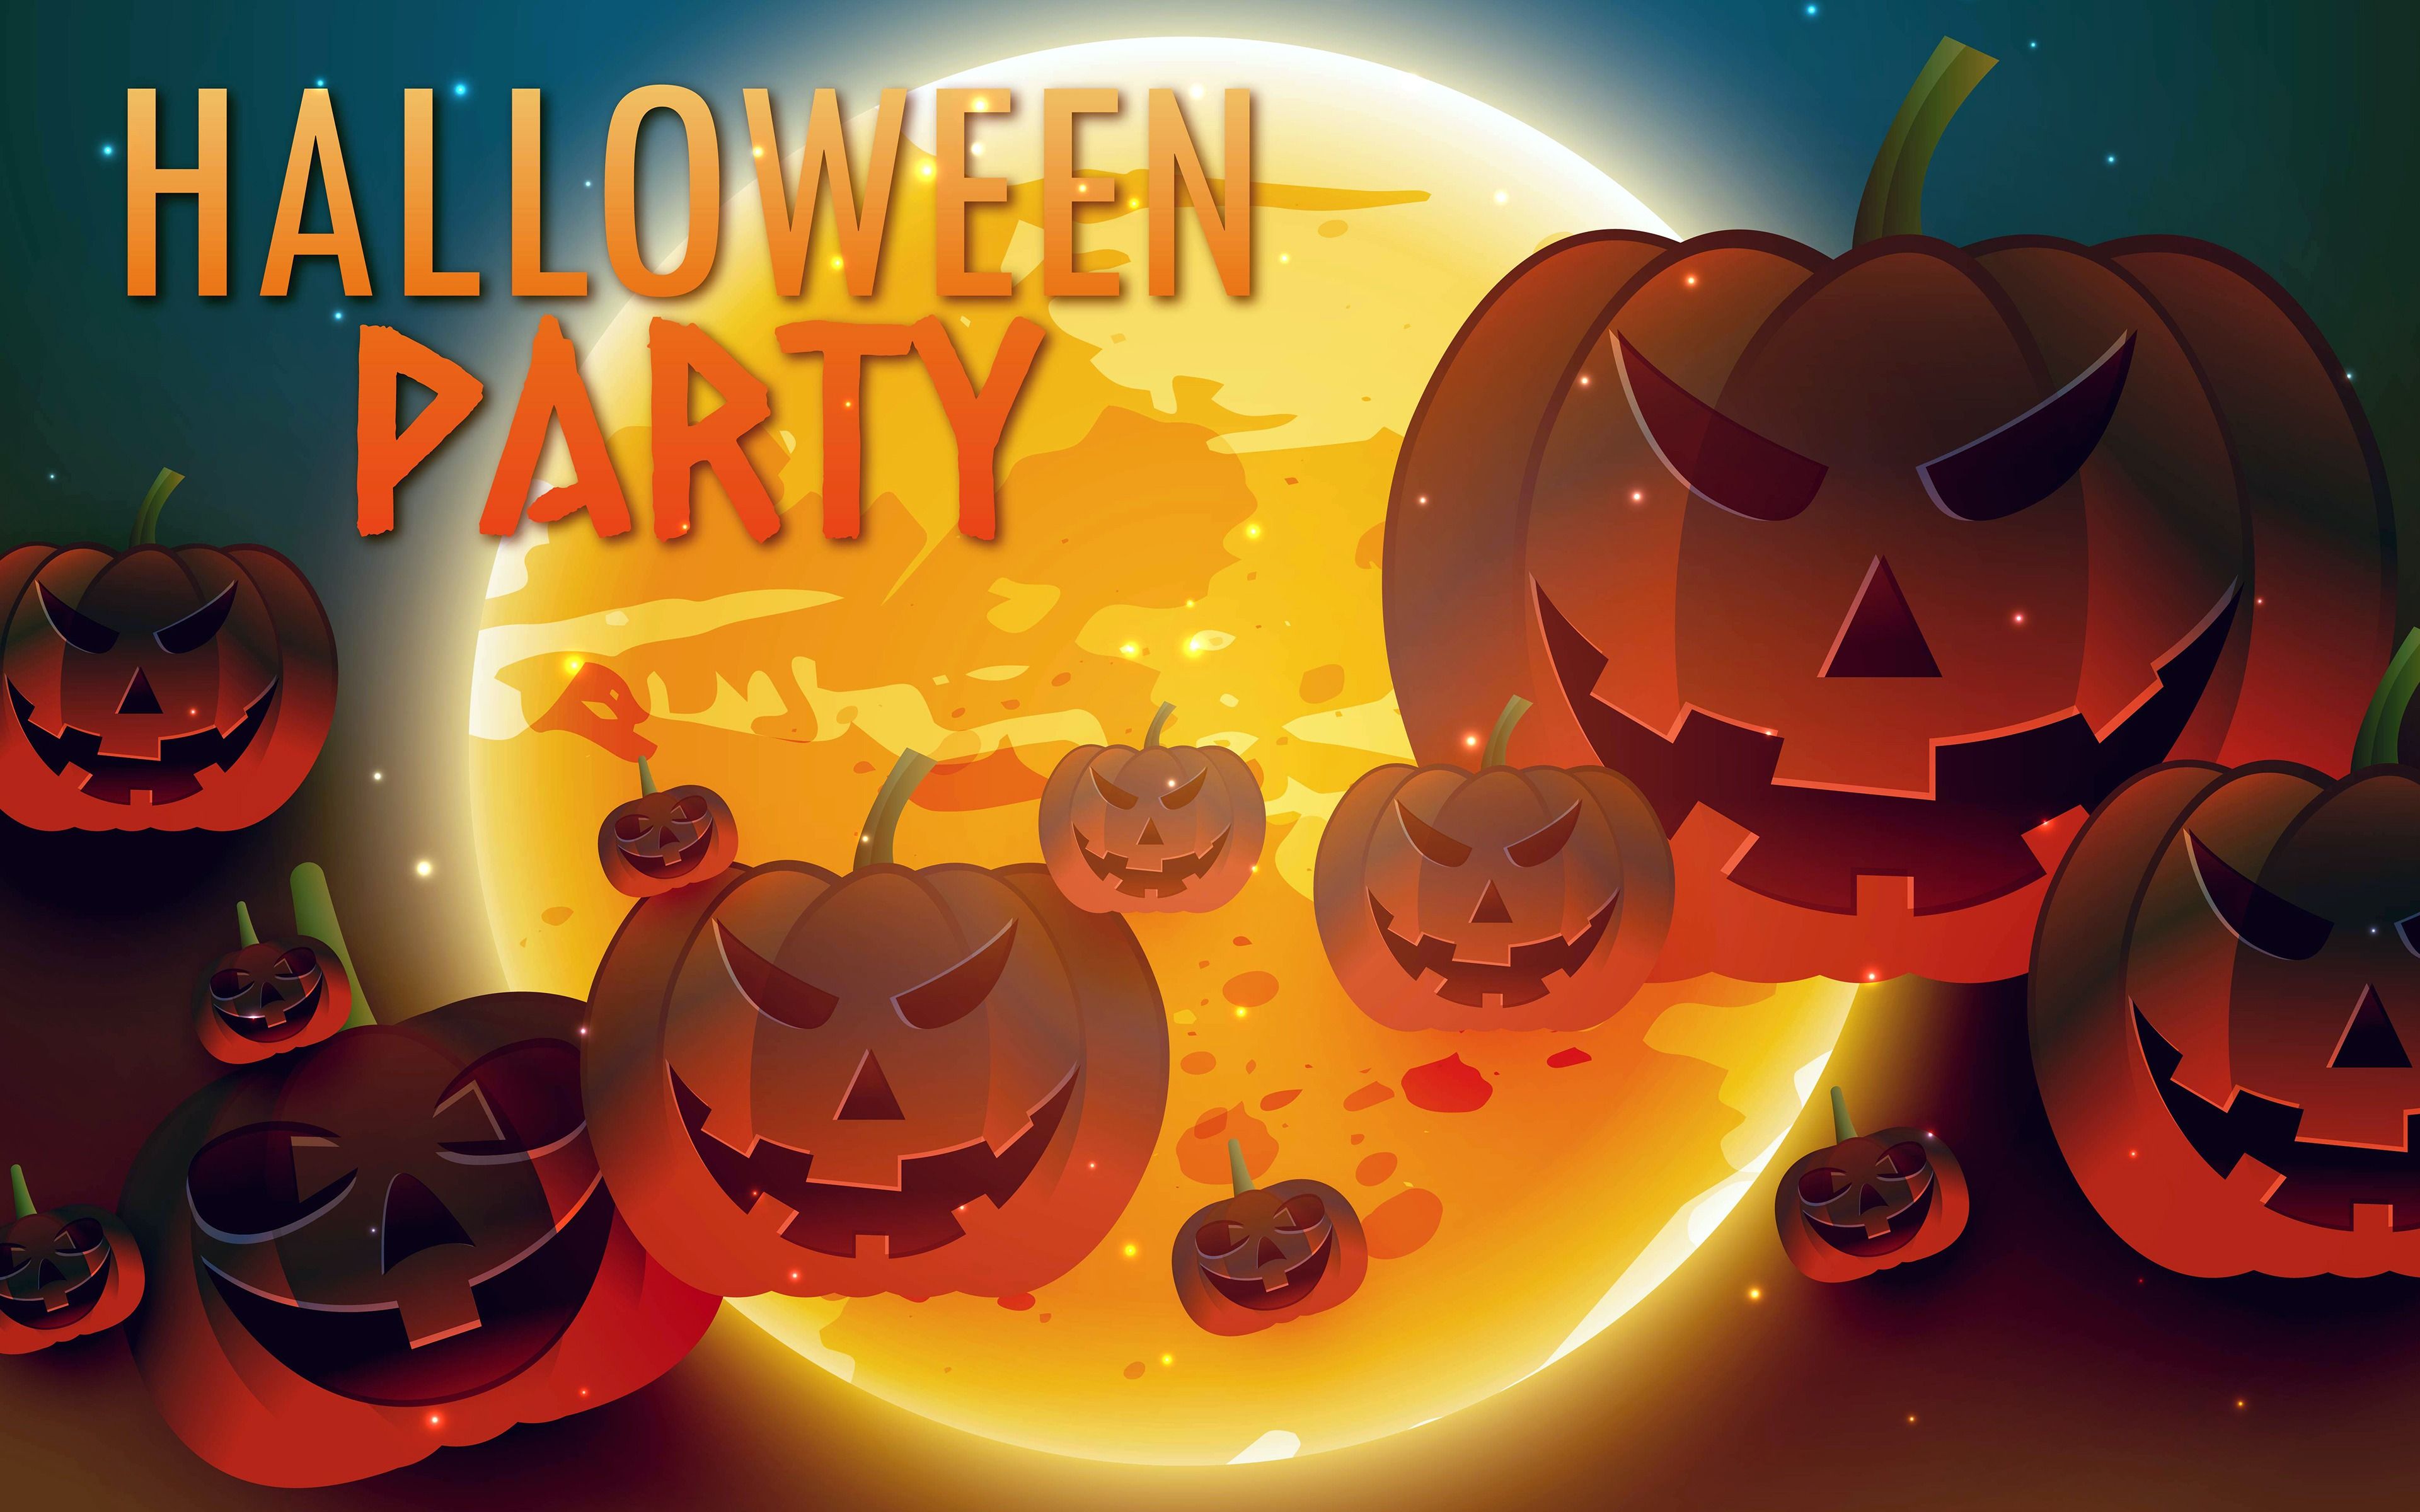 Download wallpaper Happy Halloween, 4k, night, pumpkin, moon, creative, Halloween Party for desktop with resolution 3840x2400. High Quality HD picture wallpaper